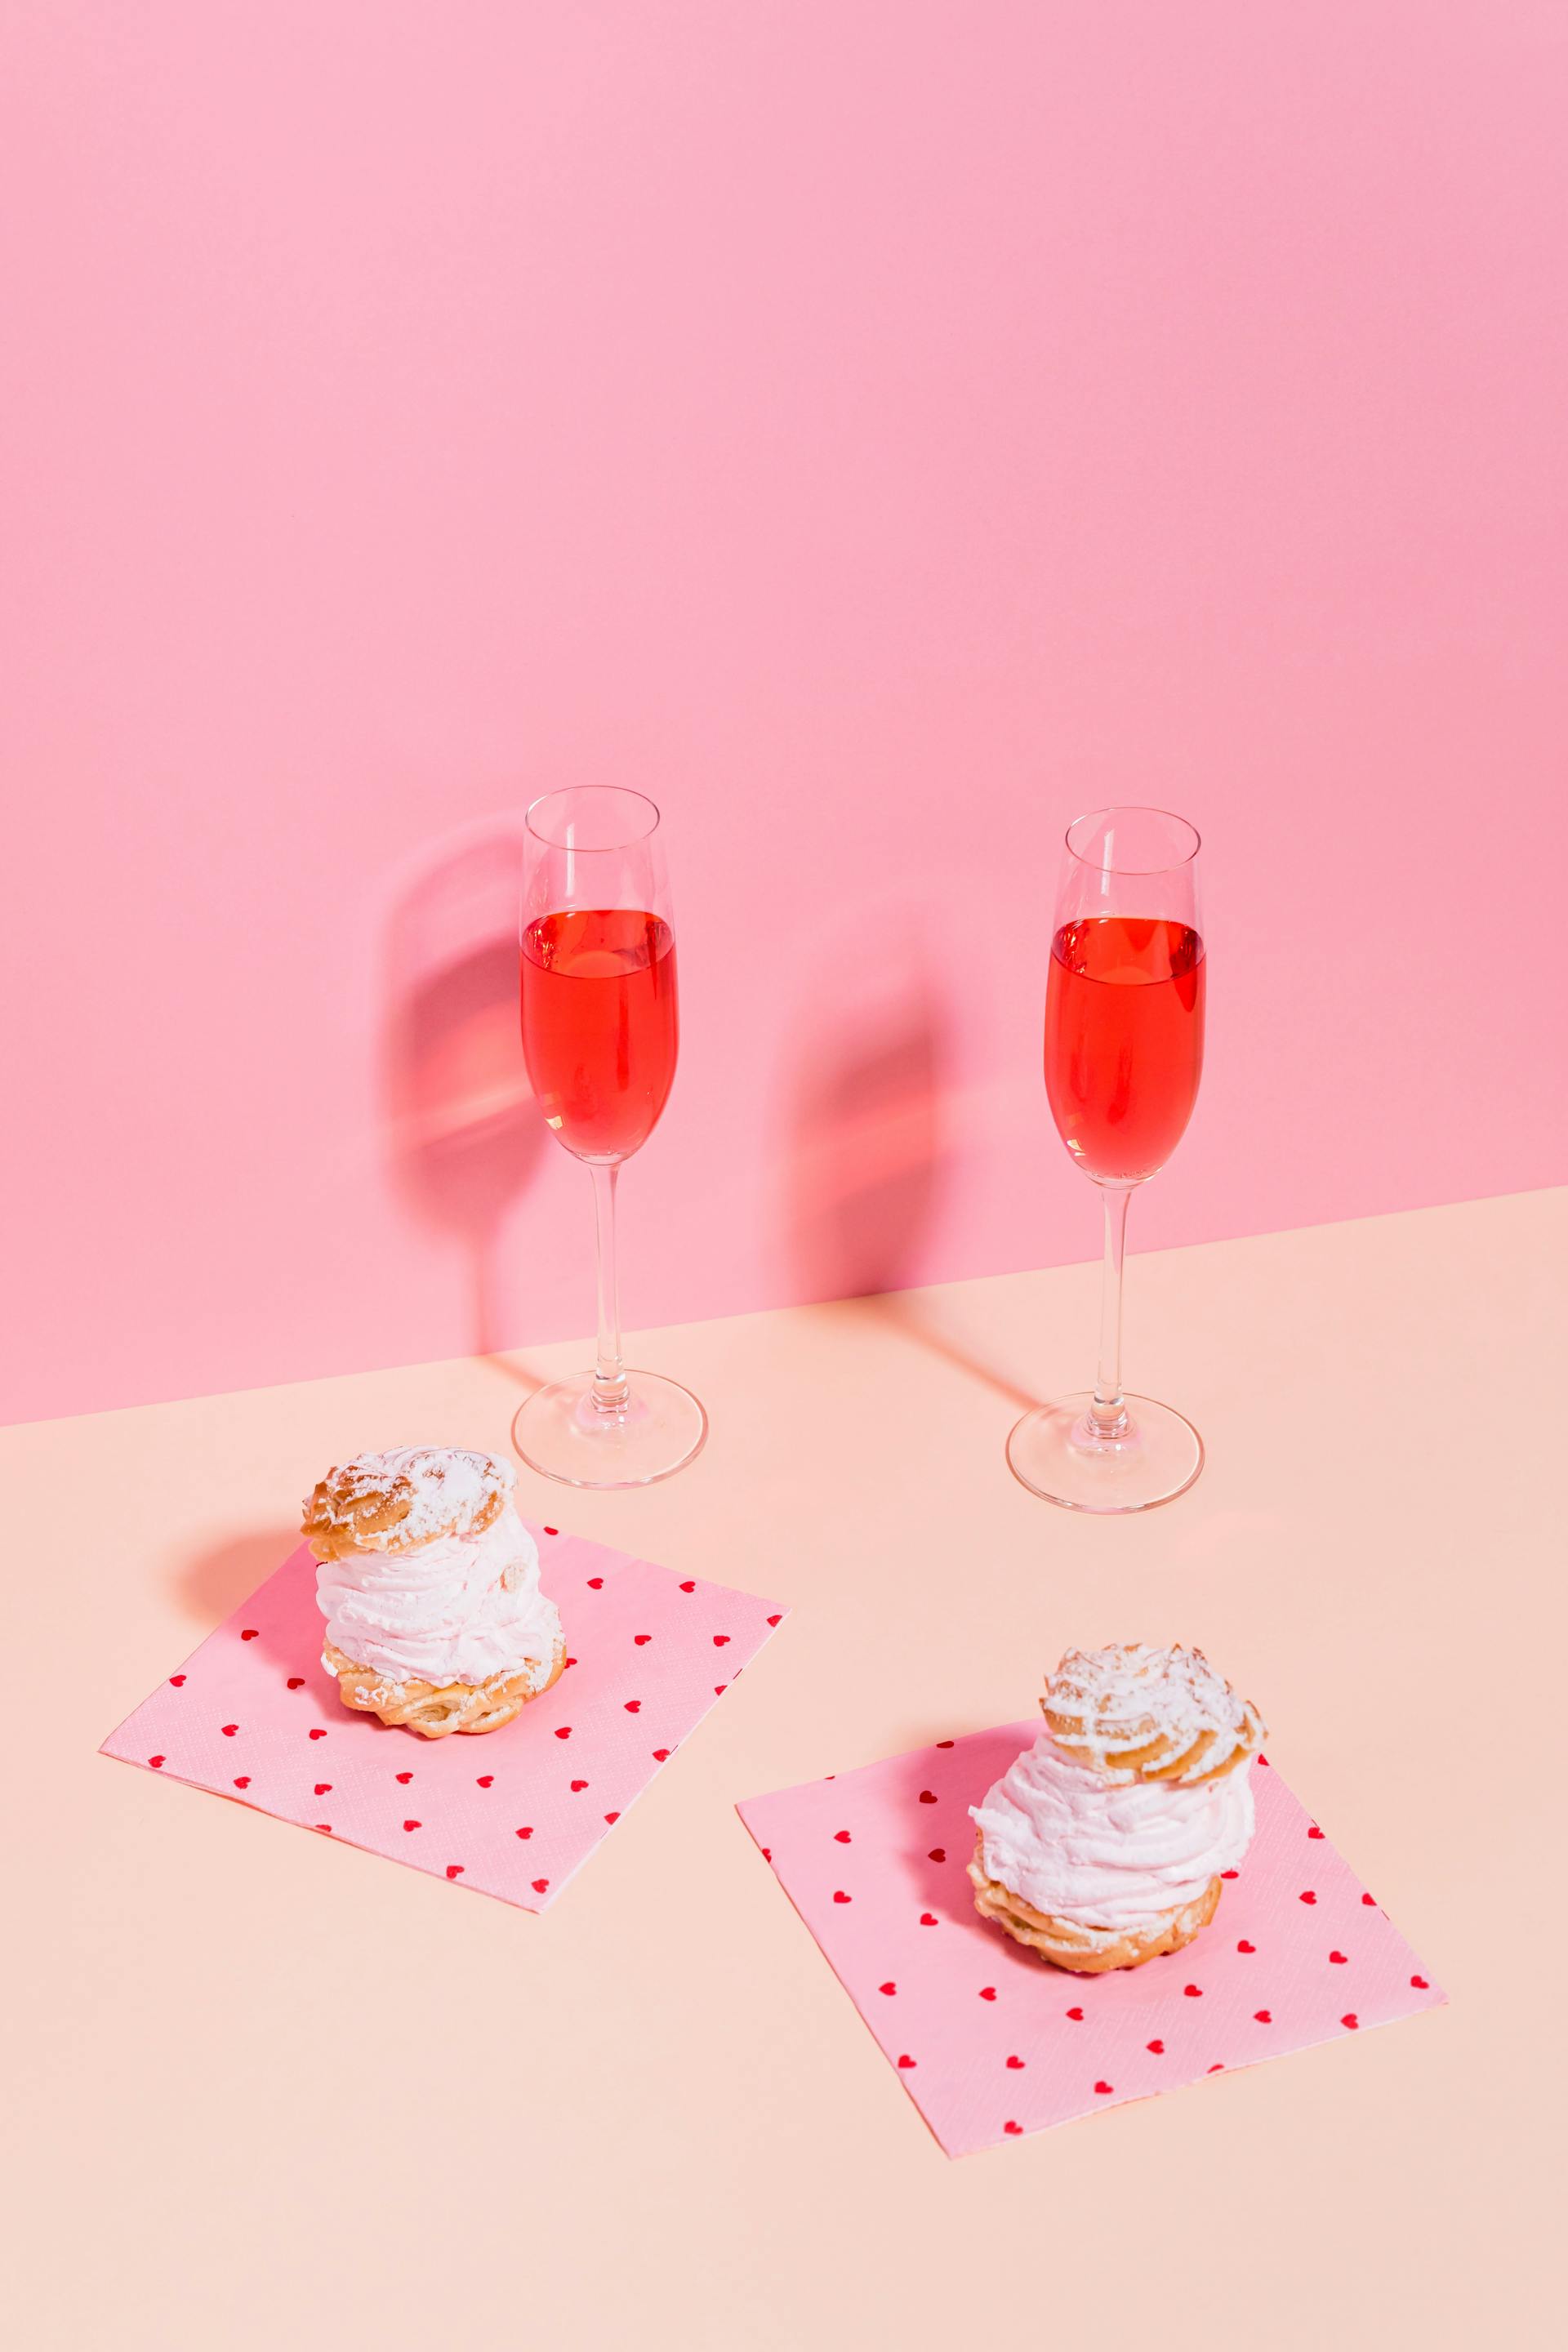 Pastries with cream and champagne flutes on a table | Source: Pexels